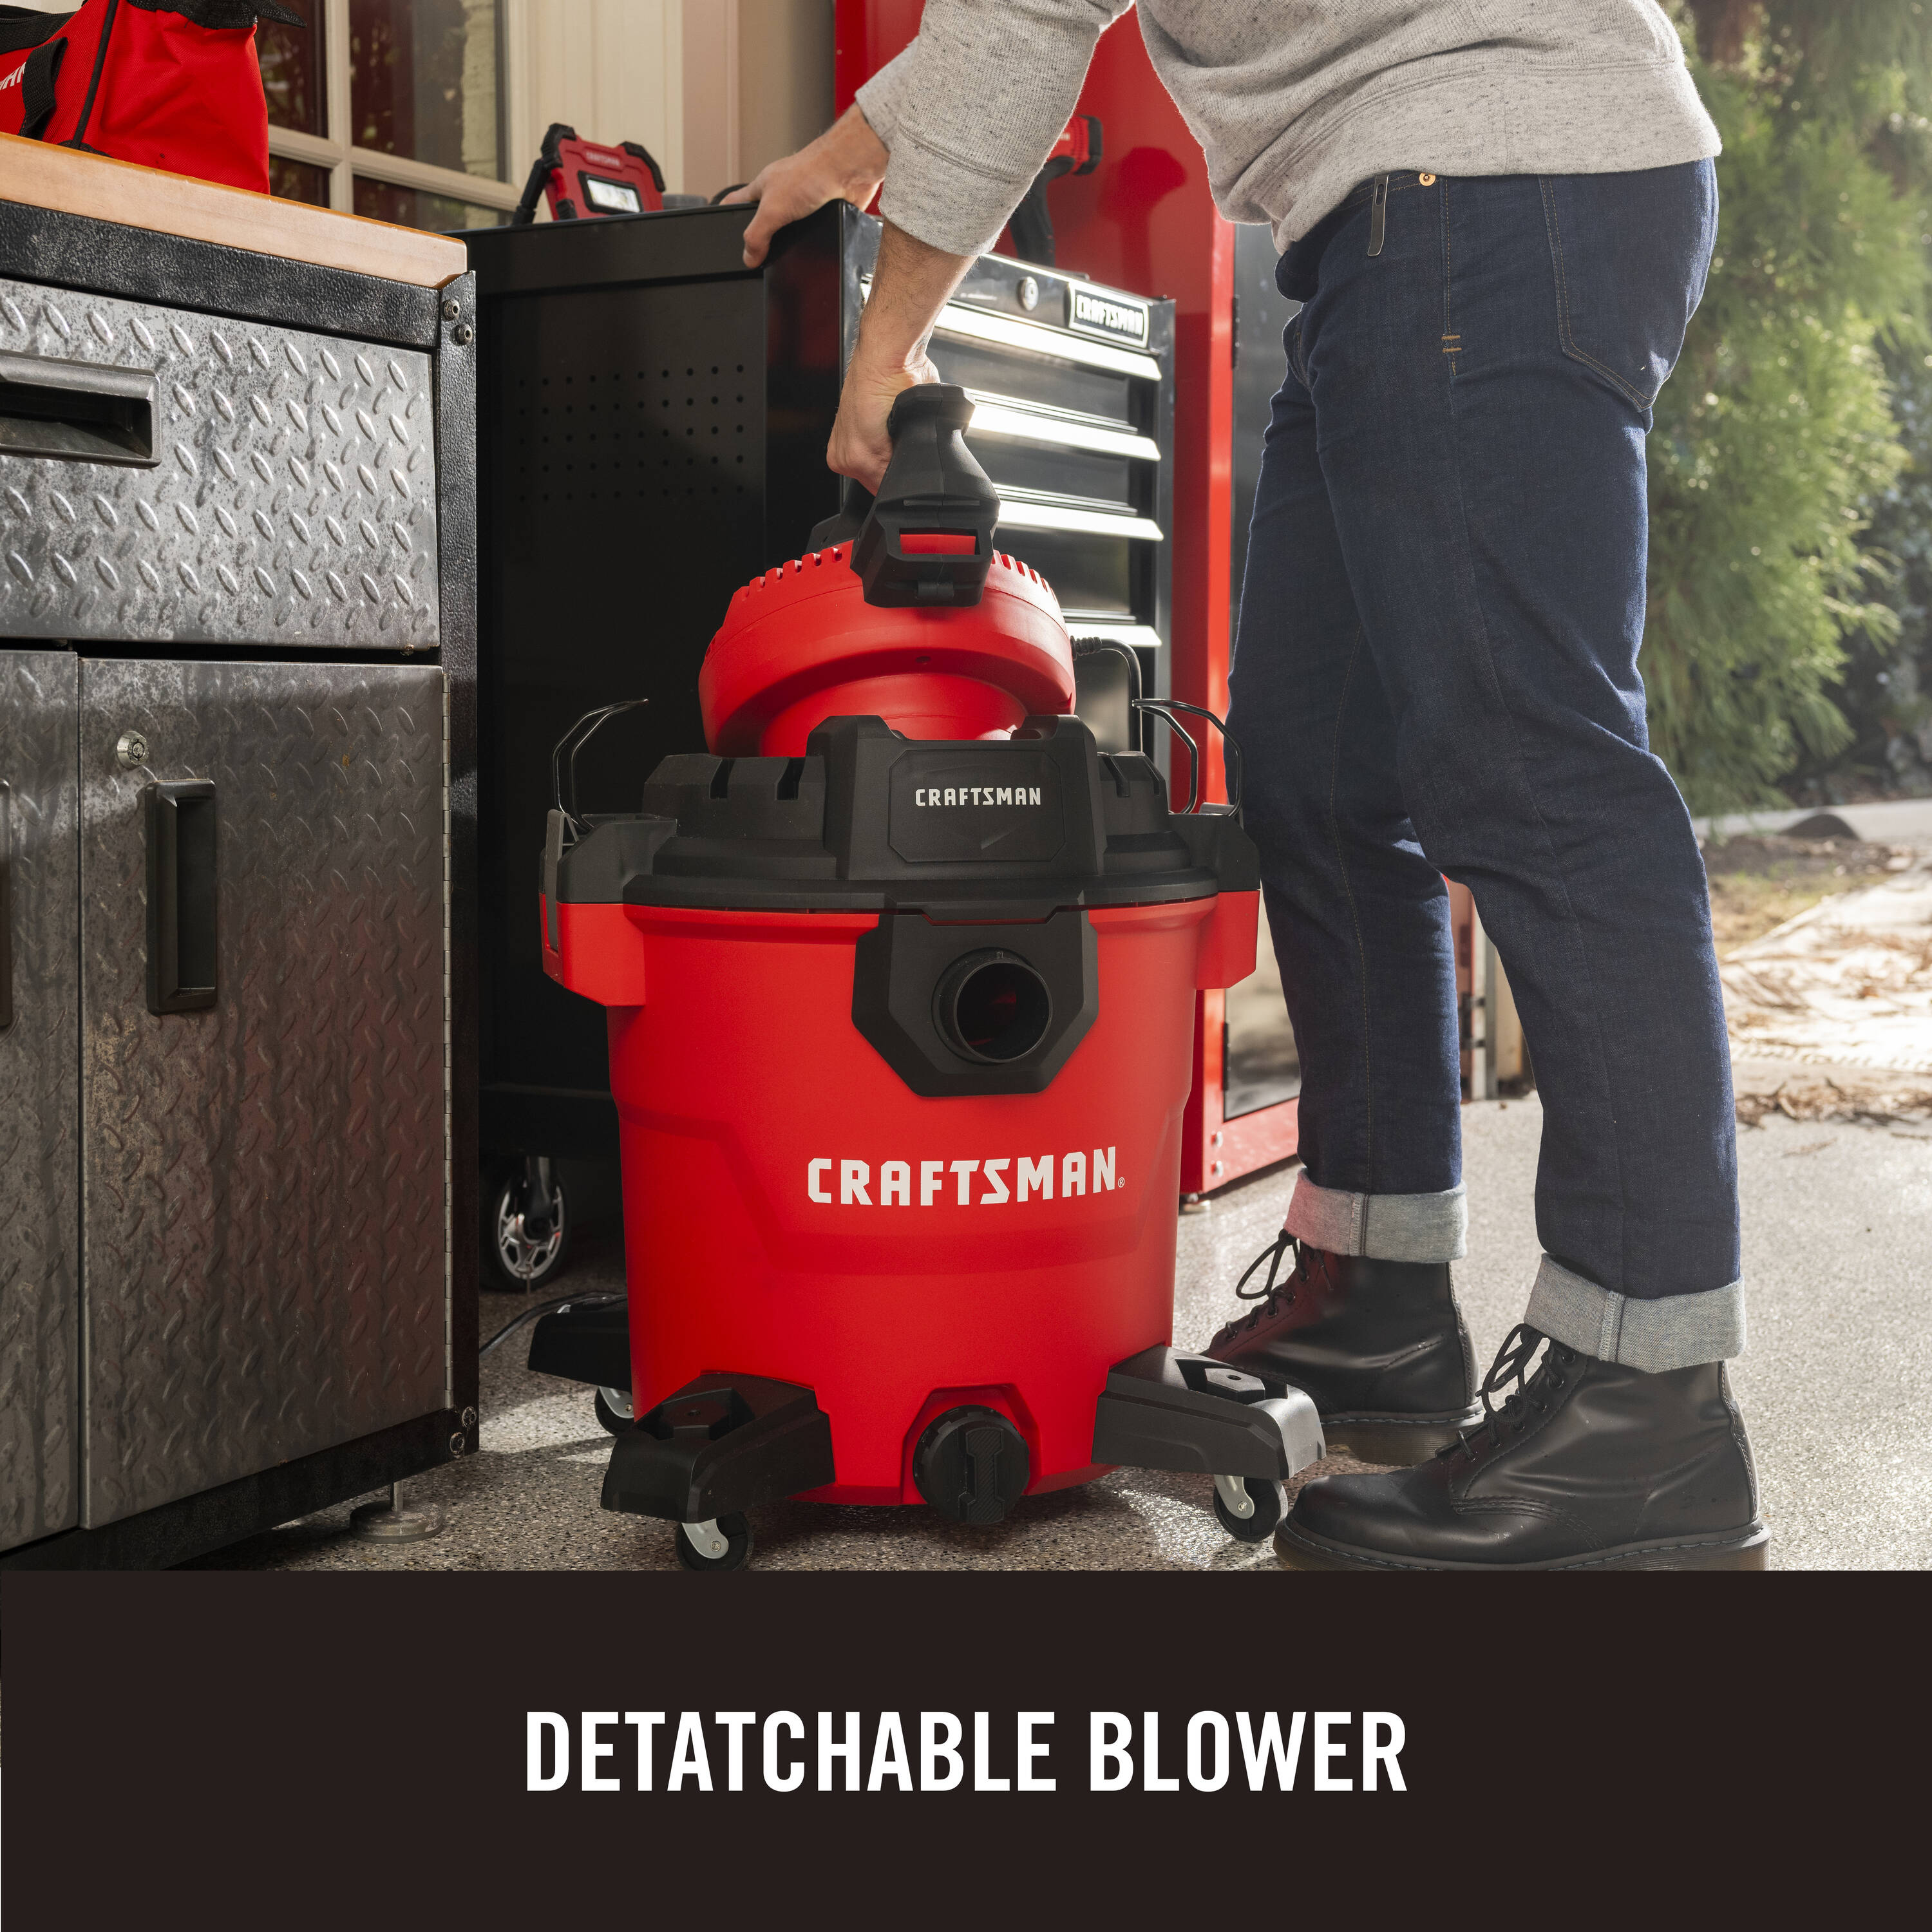 CRAFTSMAN Detachable Blower 12-Gallons 6-HP Corded Wet/Dry Shop